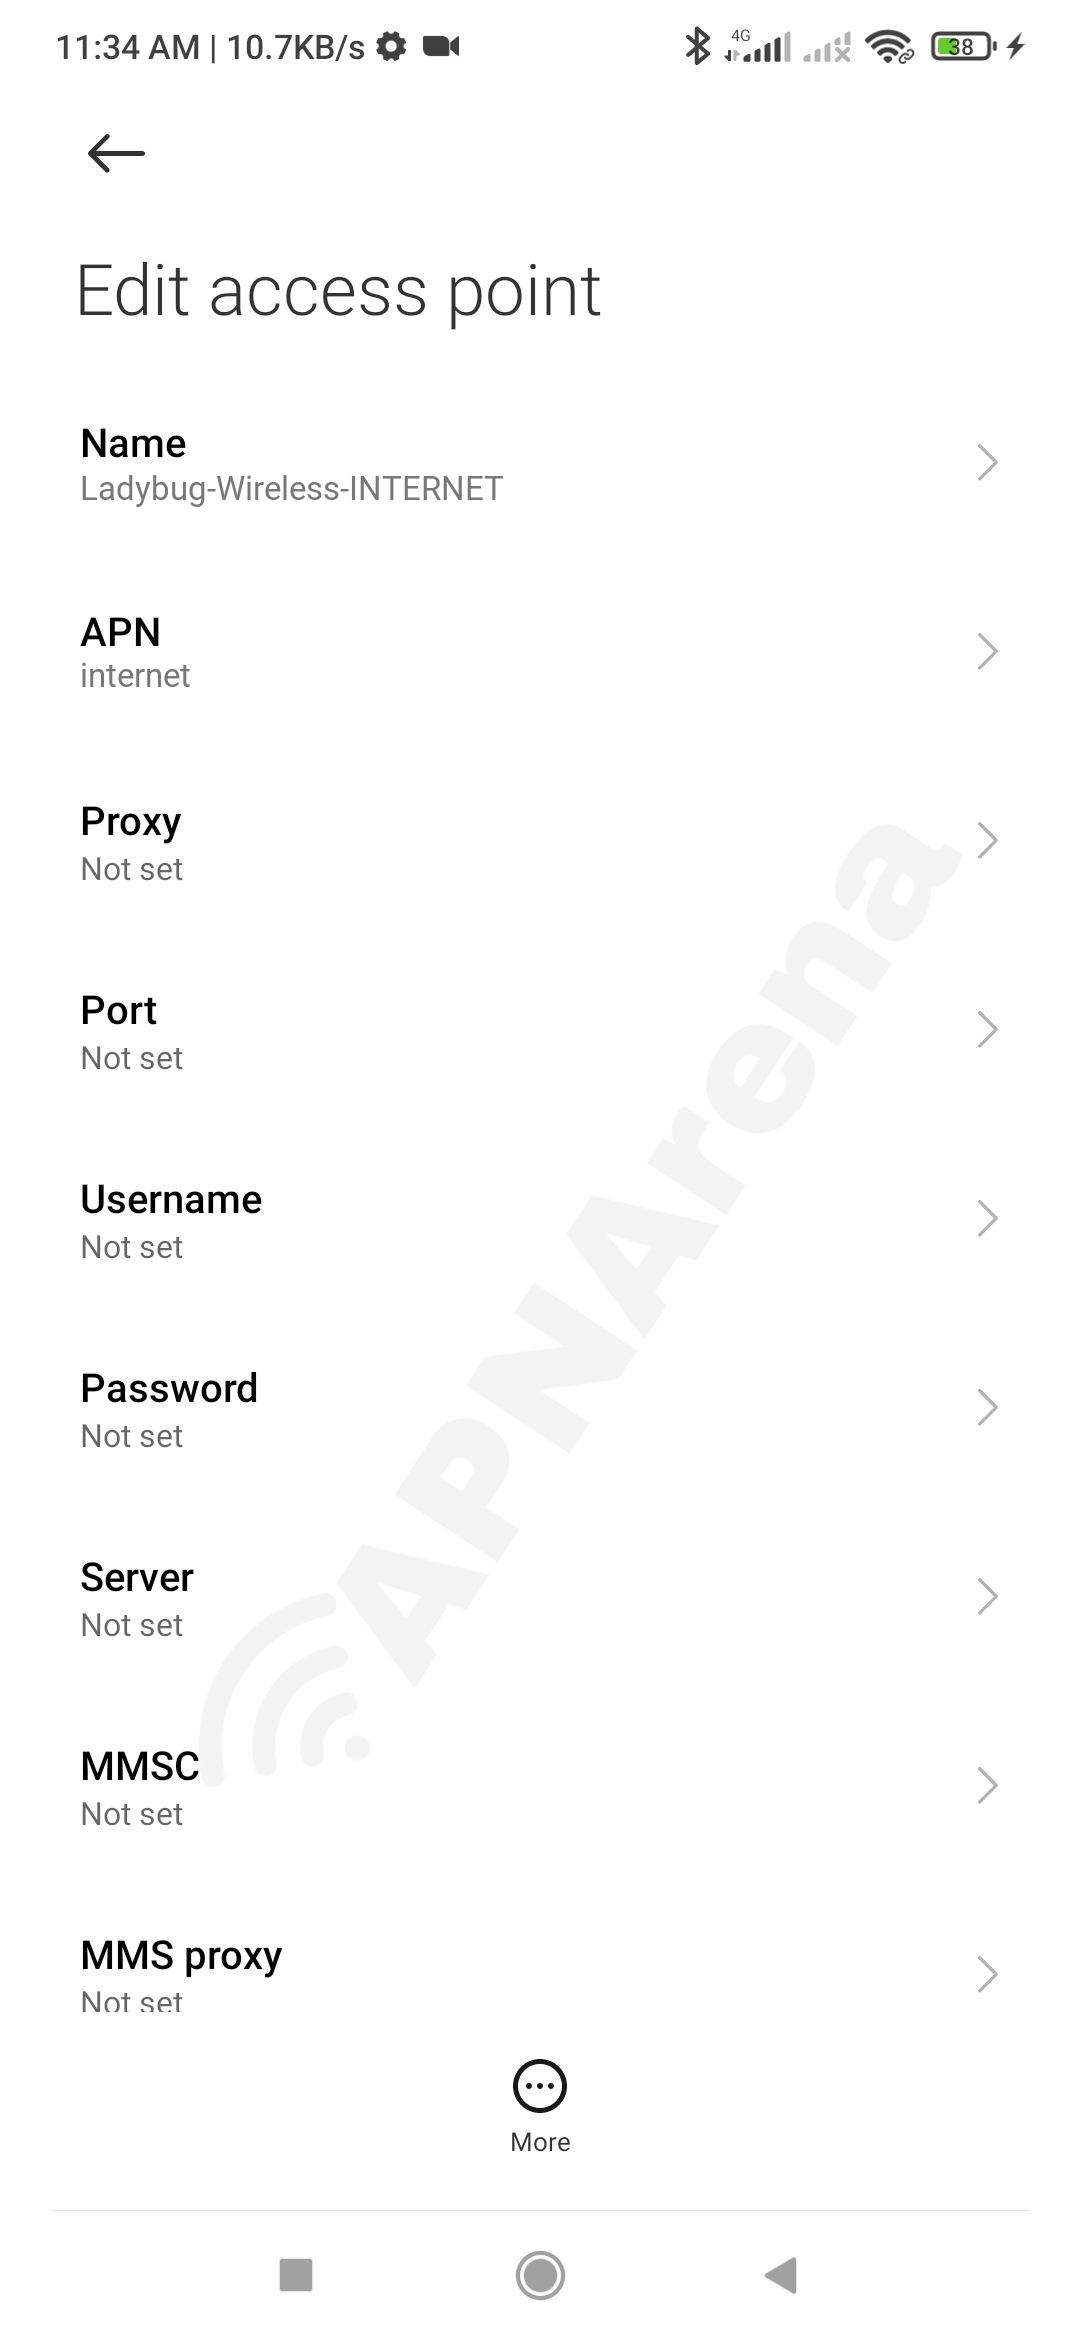 Ladybug Wireless APN Settings for Android